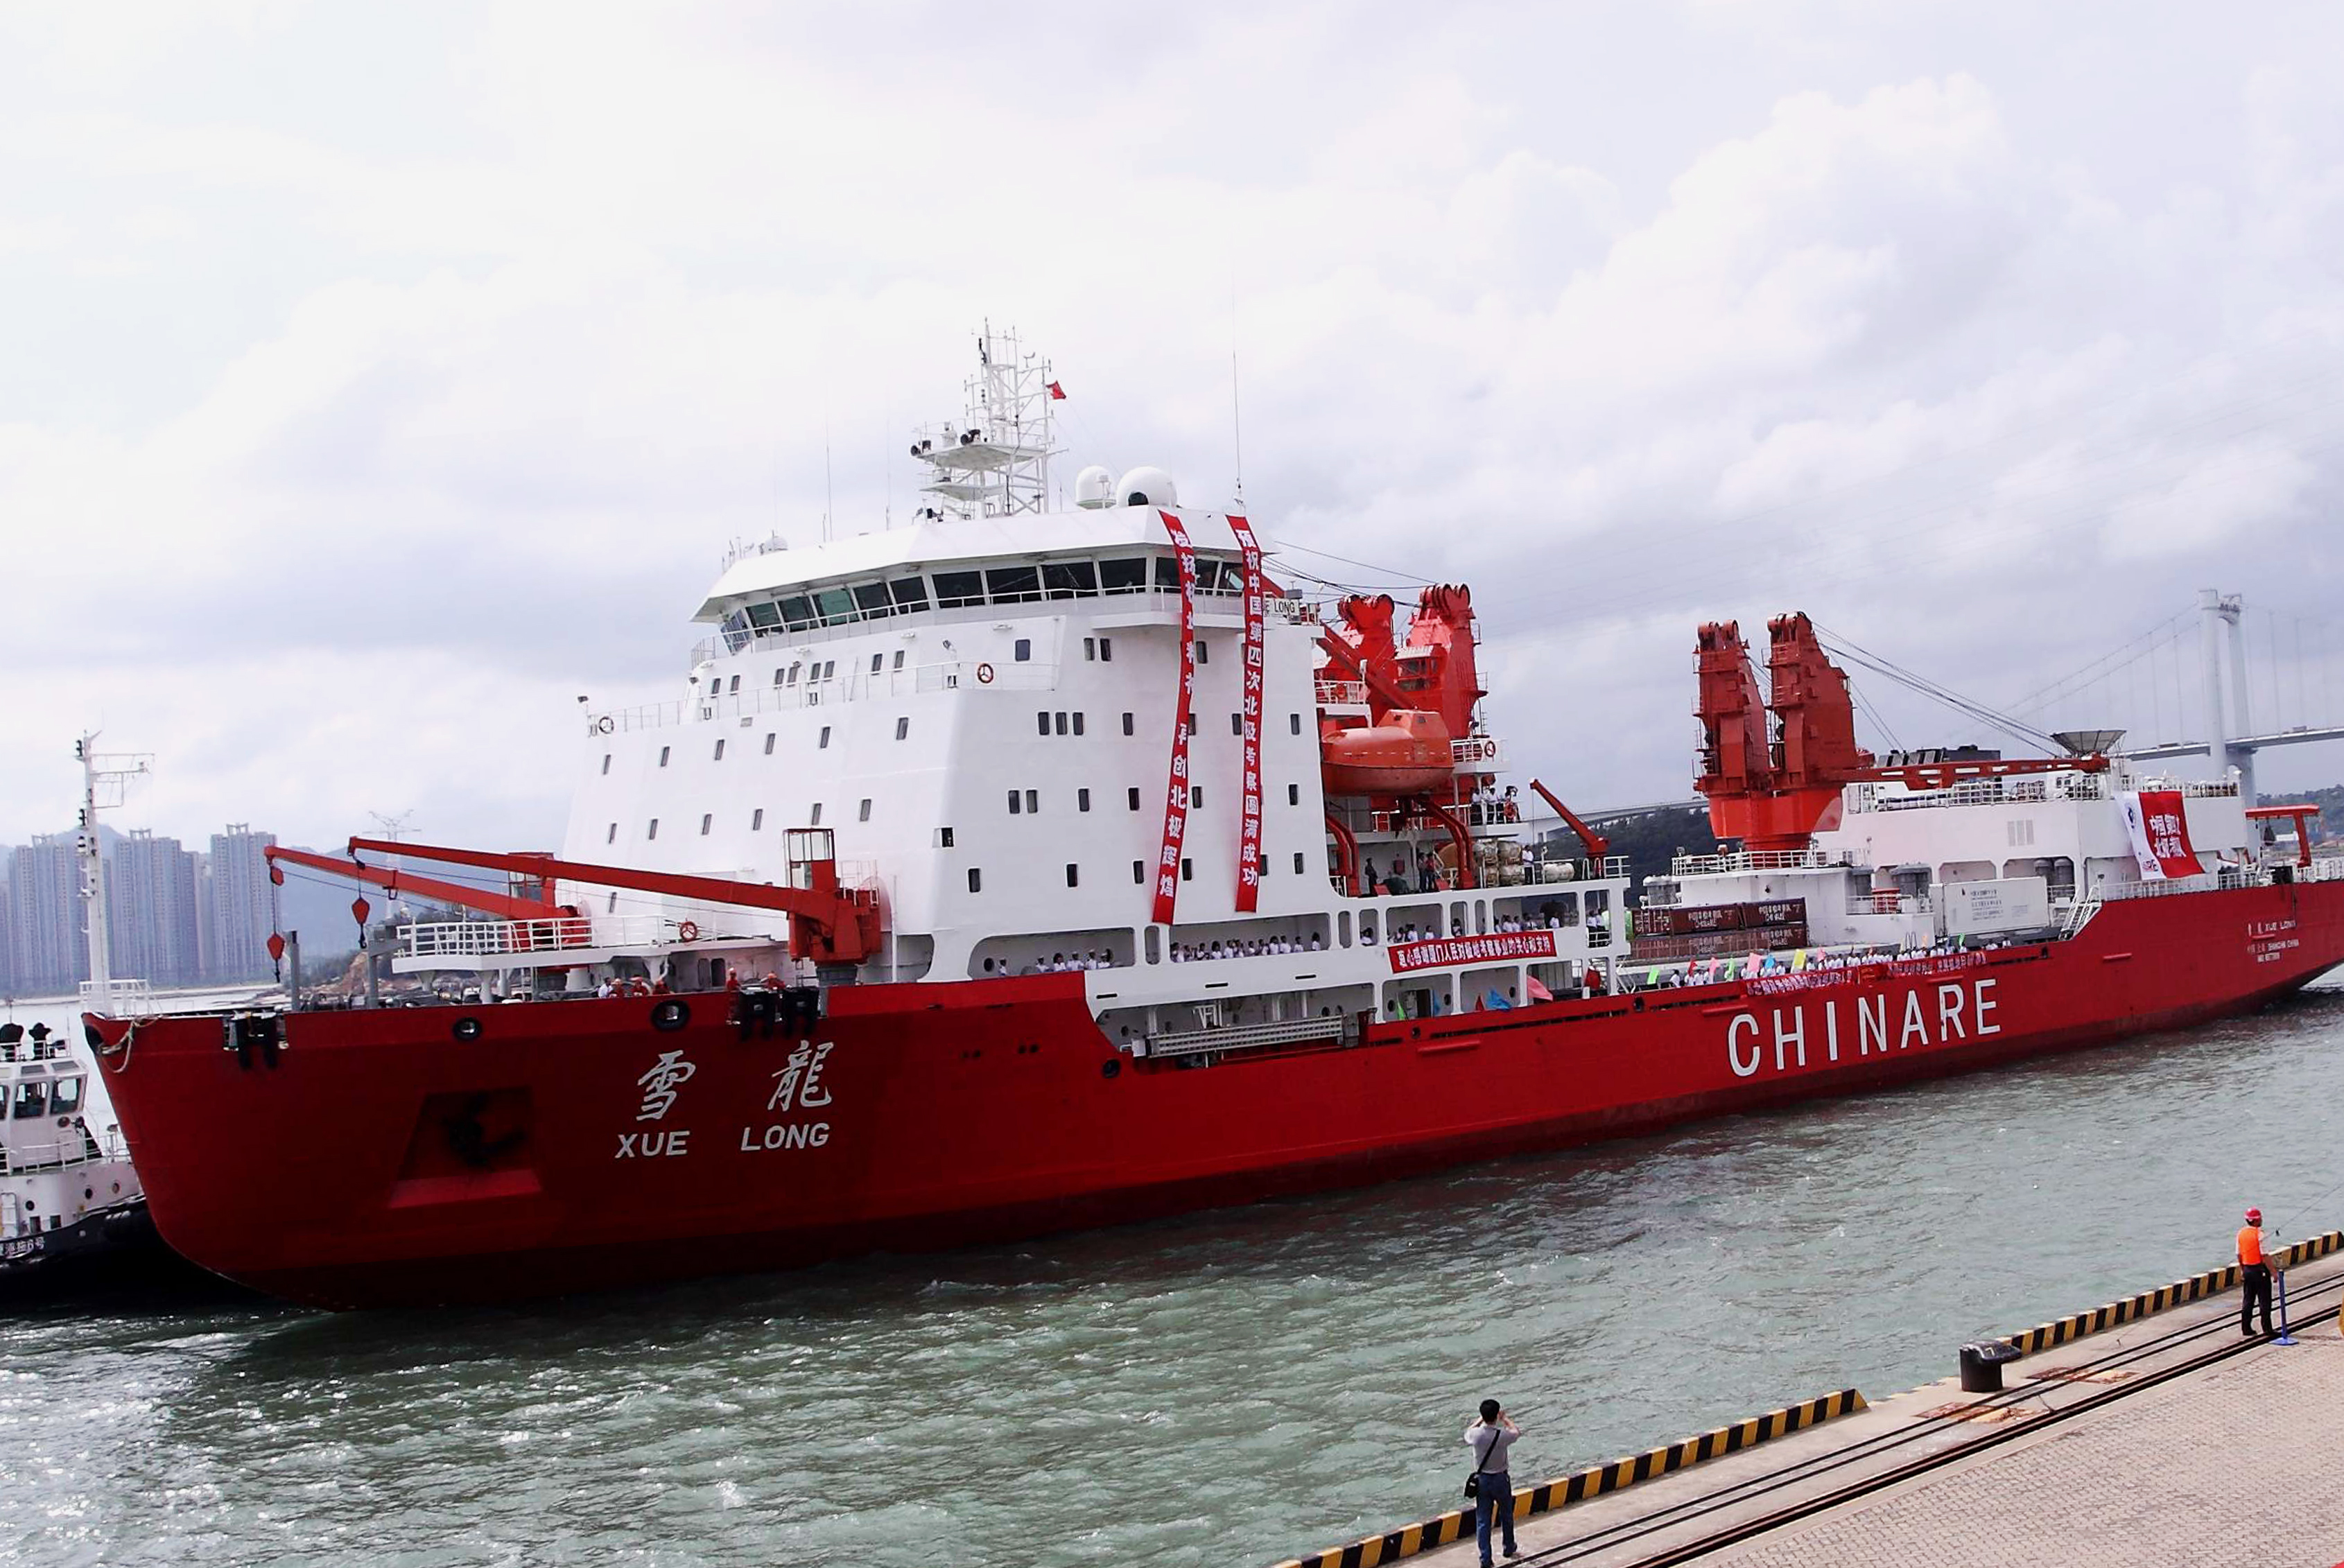 The Chinese research vessel and ice-breaker Xuelong which will depart for the Arctic, arrives in Xiamen, south China's Fujian province on June 27, 2010, as the Arctic, a region much coveted by energy-hungry Beijing for its as-yet untapped supplies of oil and natural gas. Thanks to global warming, the frozen sheets blanketing the Arctic are expected to retreat, at least in summer, enough to allow navigation of the area and access to its wealth of natural resources. CHINA OUT AFP PHOTO (Photo credit should read STR/AFP via Getty Images)